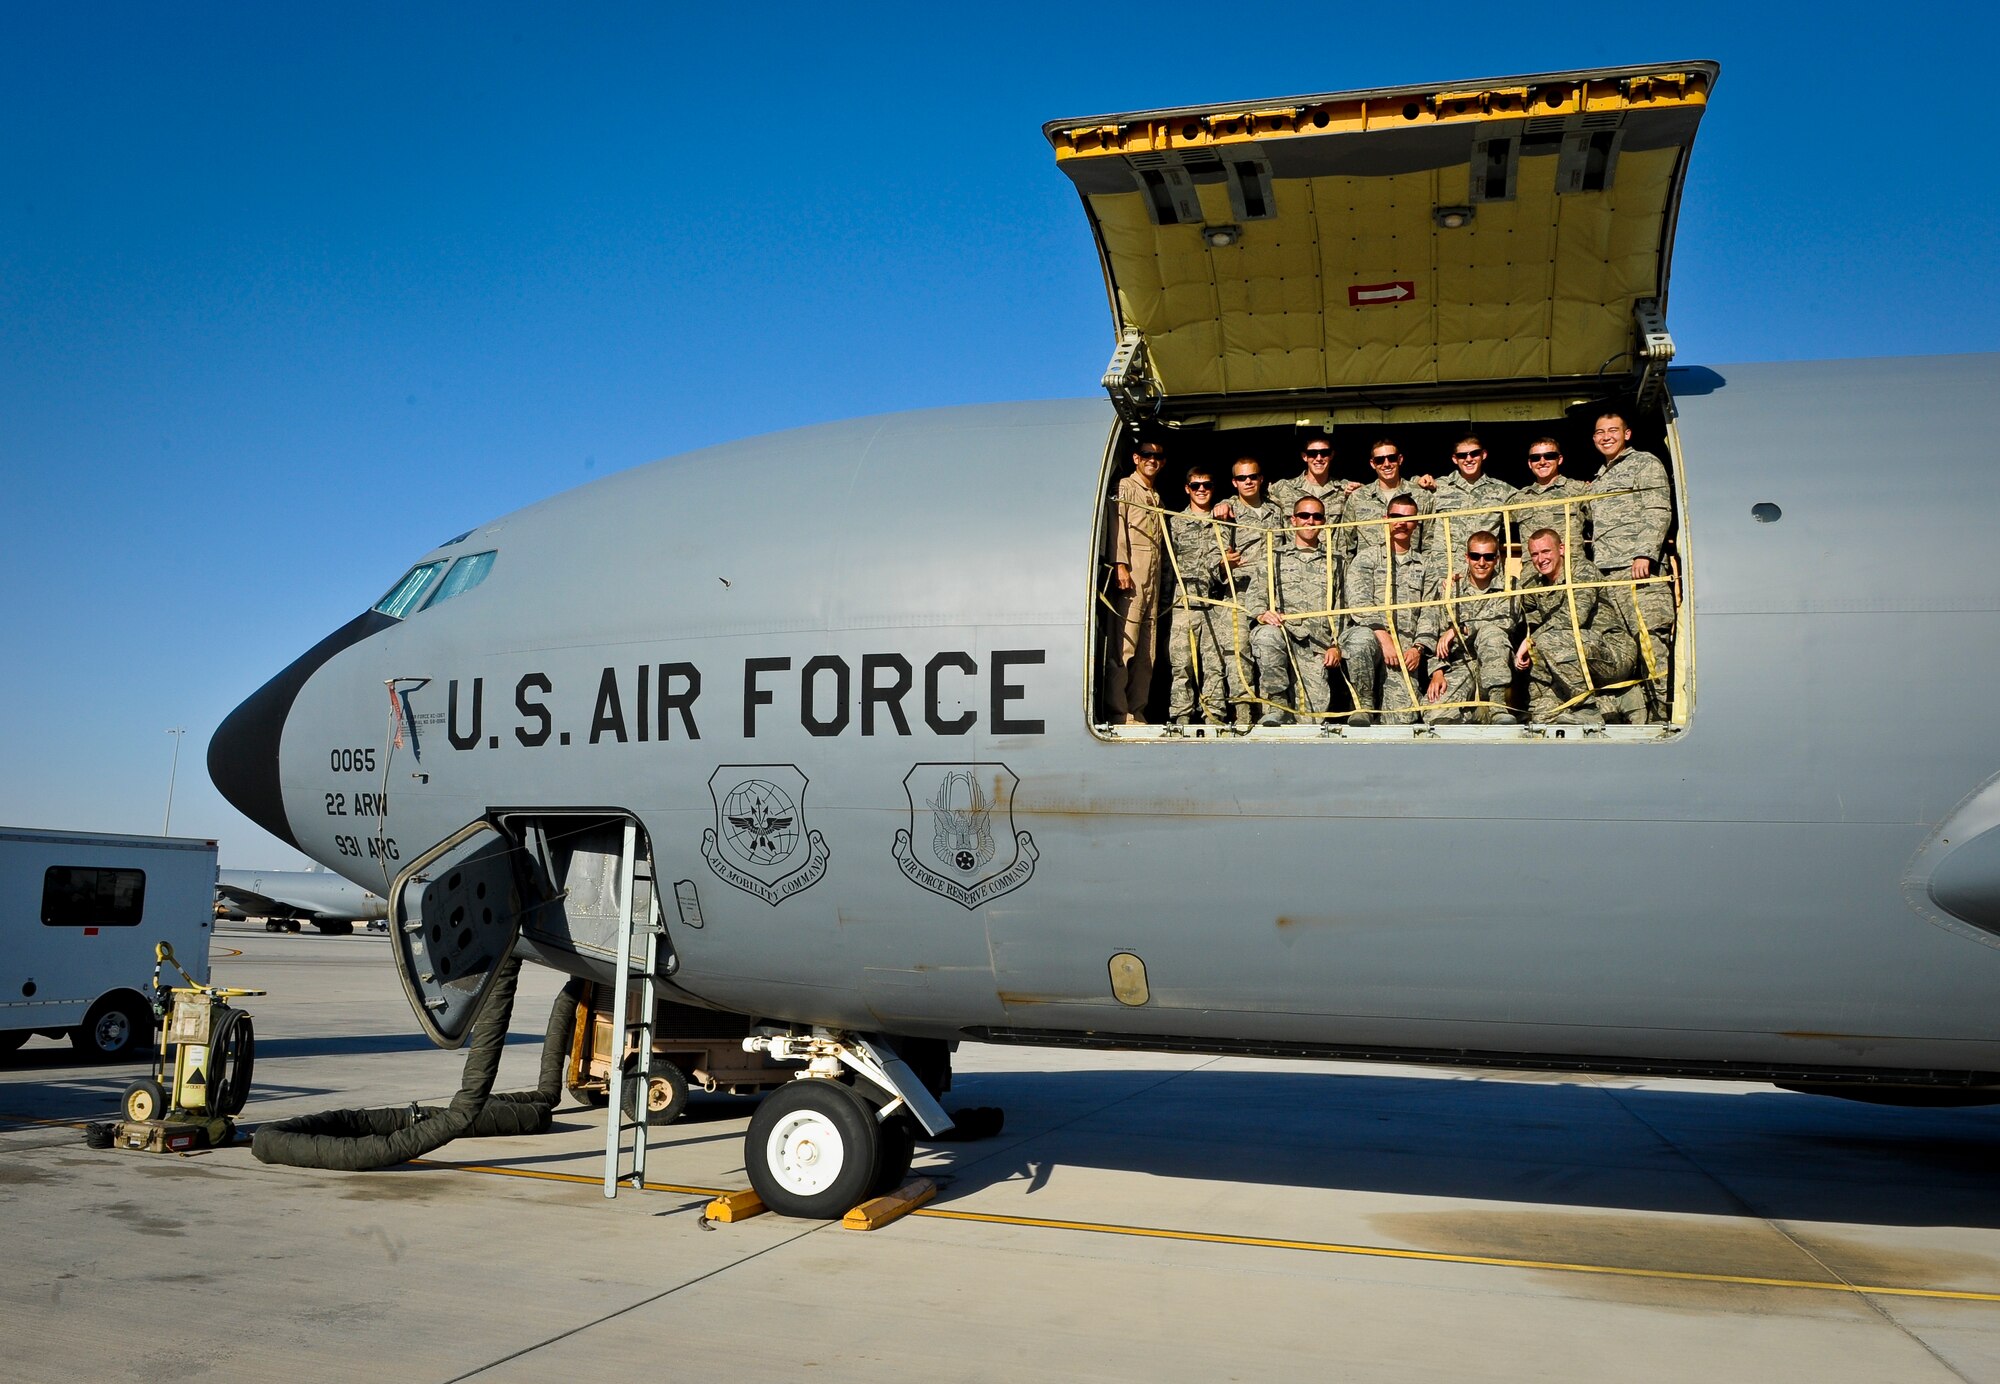 U.S. Air Force Academy cadets pose for a photo on board a KC-135 Stratotanker during their tour of the aerial refueler and other agencies across the base at the 379th Air Expeditionary Wing in Southwest Asia, June 24, 2013. More than 40 USAFA cadets visited the 379th AEW in June observing deployed operations first-hand and interacting with deployed U.S. and coalition forces. (U.S. Air Force photo/Senior Airman Benjamin Stratton)